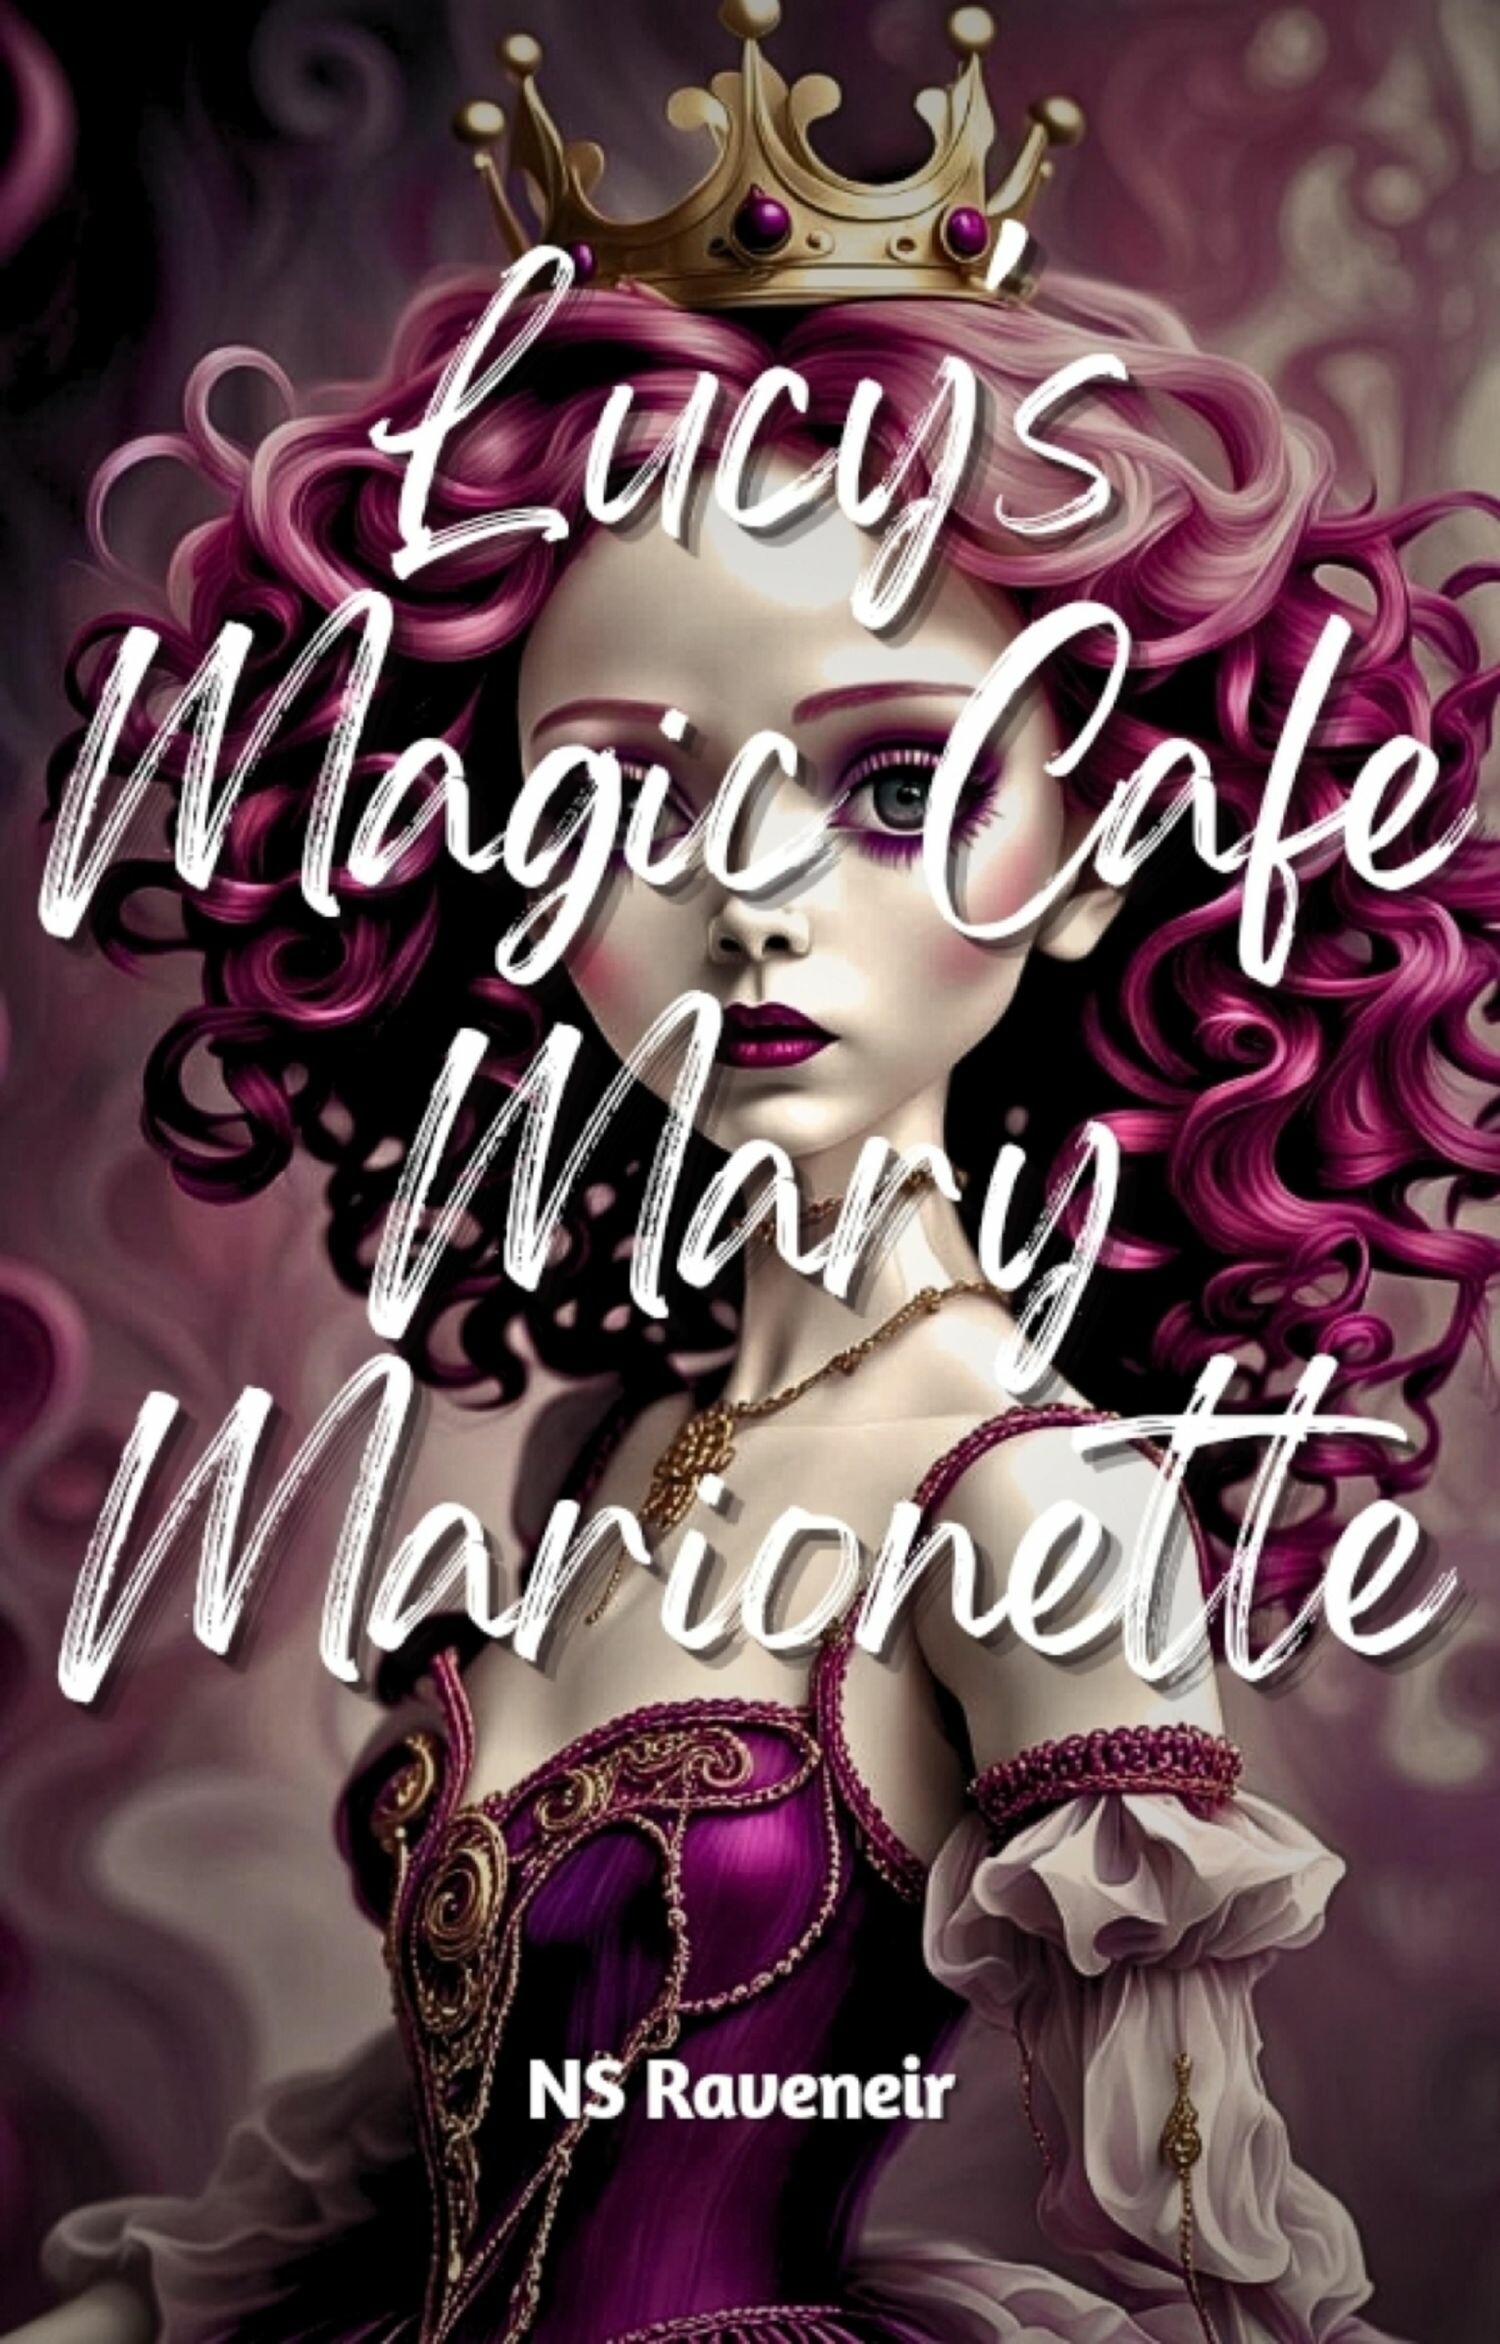 Lucy's Magic Cafe : Mary Marionette